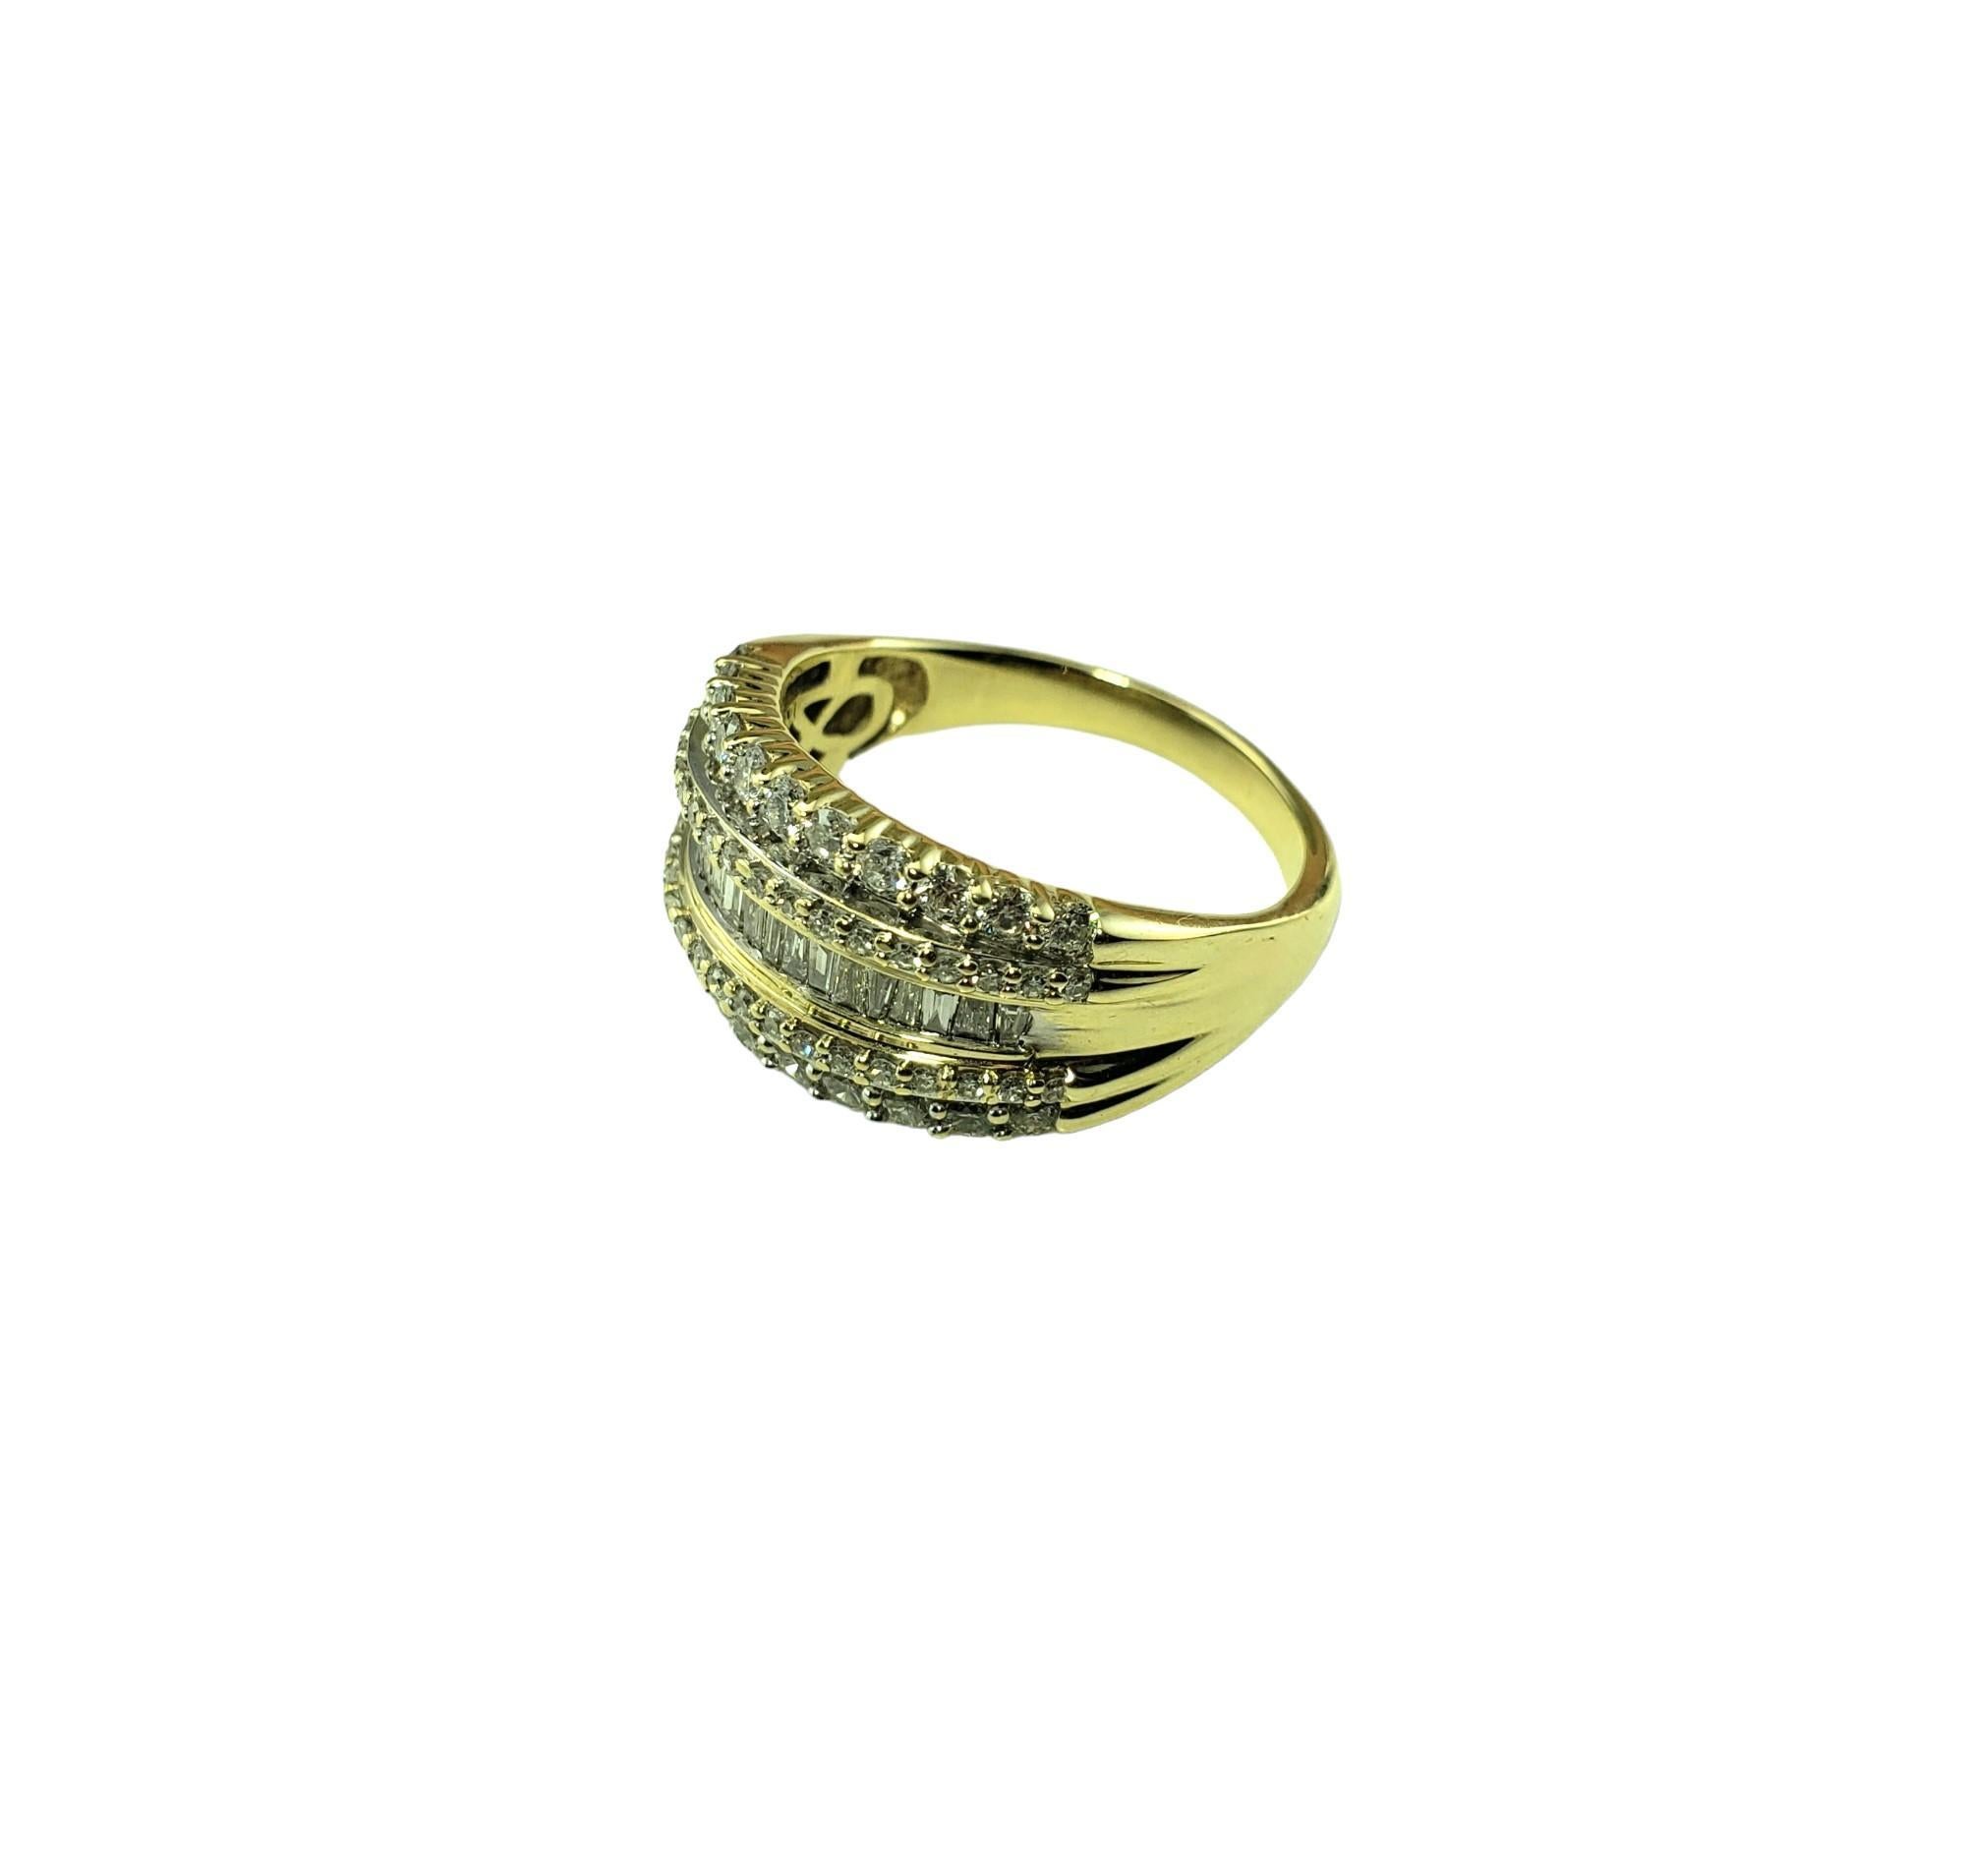 10K Yellow Gold and Diamond Band Ring Size 7.5 #15458 In Good Condition For Sale In Washington Depot, CT